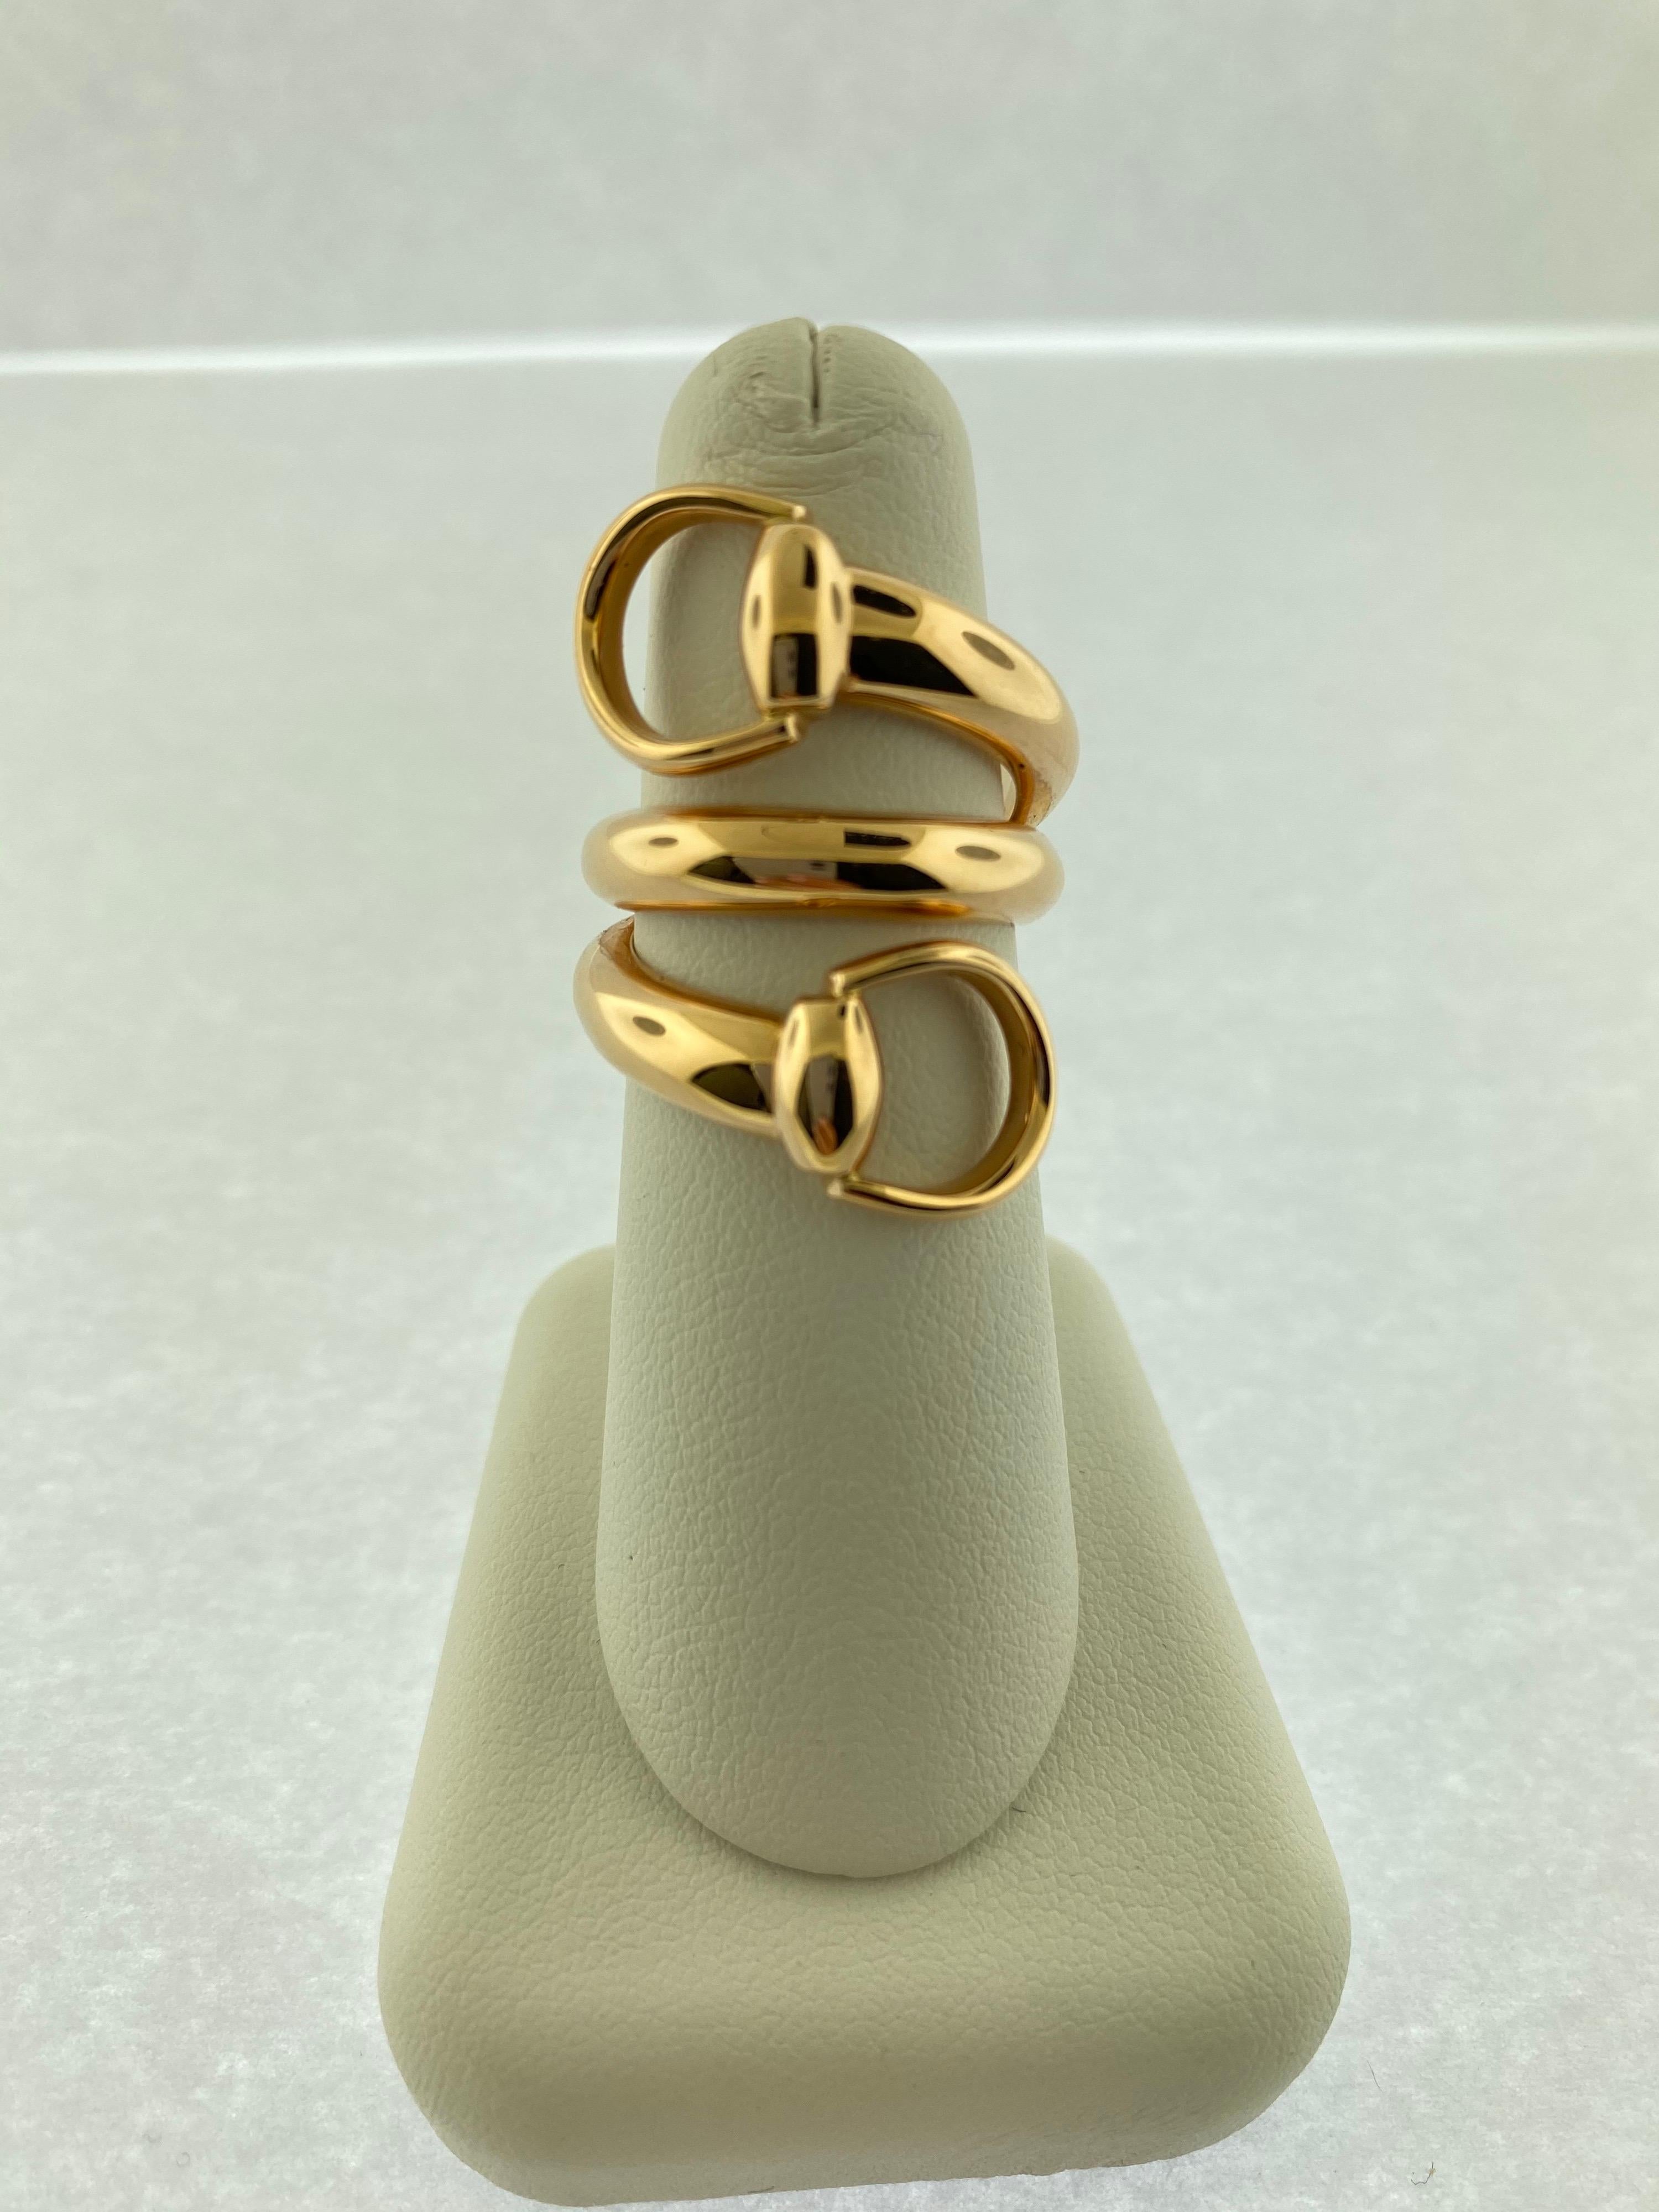 New, unworn Gucci Mors Limited Addition Horse belt Ring. Finley Crafted in 18k Yellow Gold. 
It comes with original box.

Viewings available in out NYC wholesale office by appointment only.
Please contact us for more information.